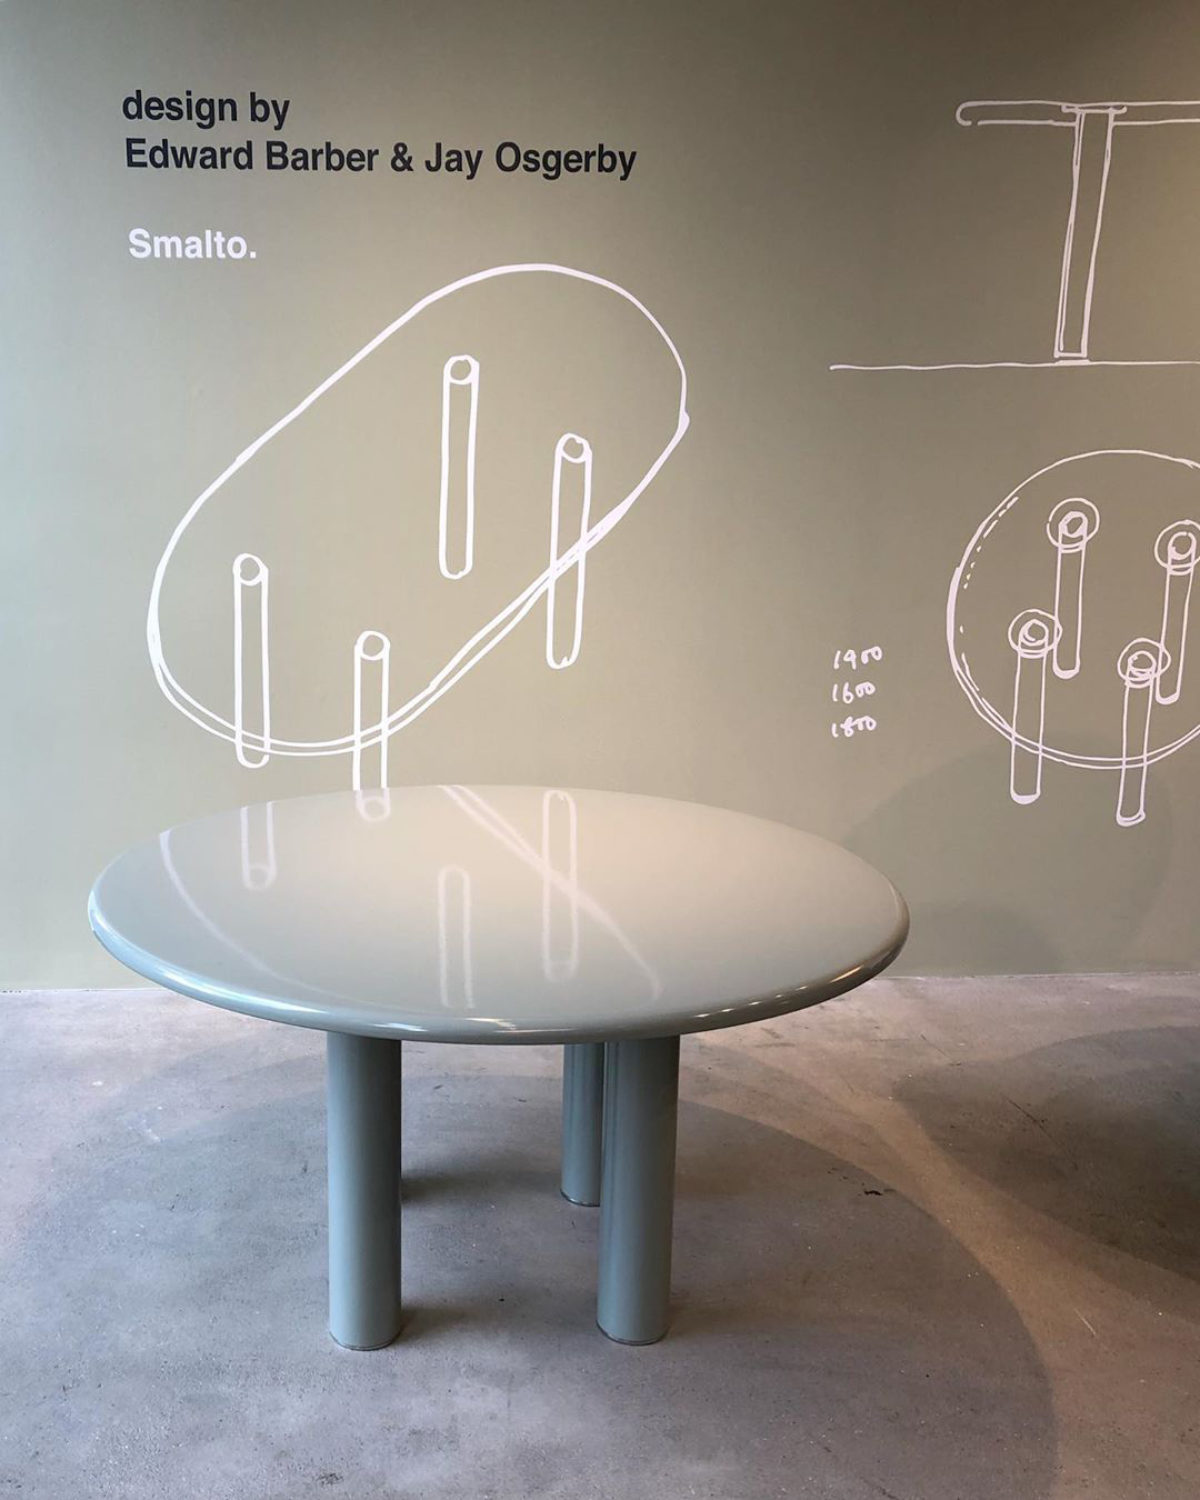 See Knoll's sleek new stools and side table by Edward Barber and Jay Osgerby